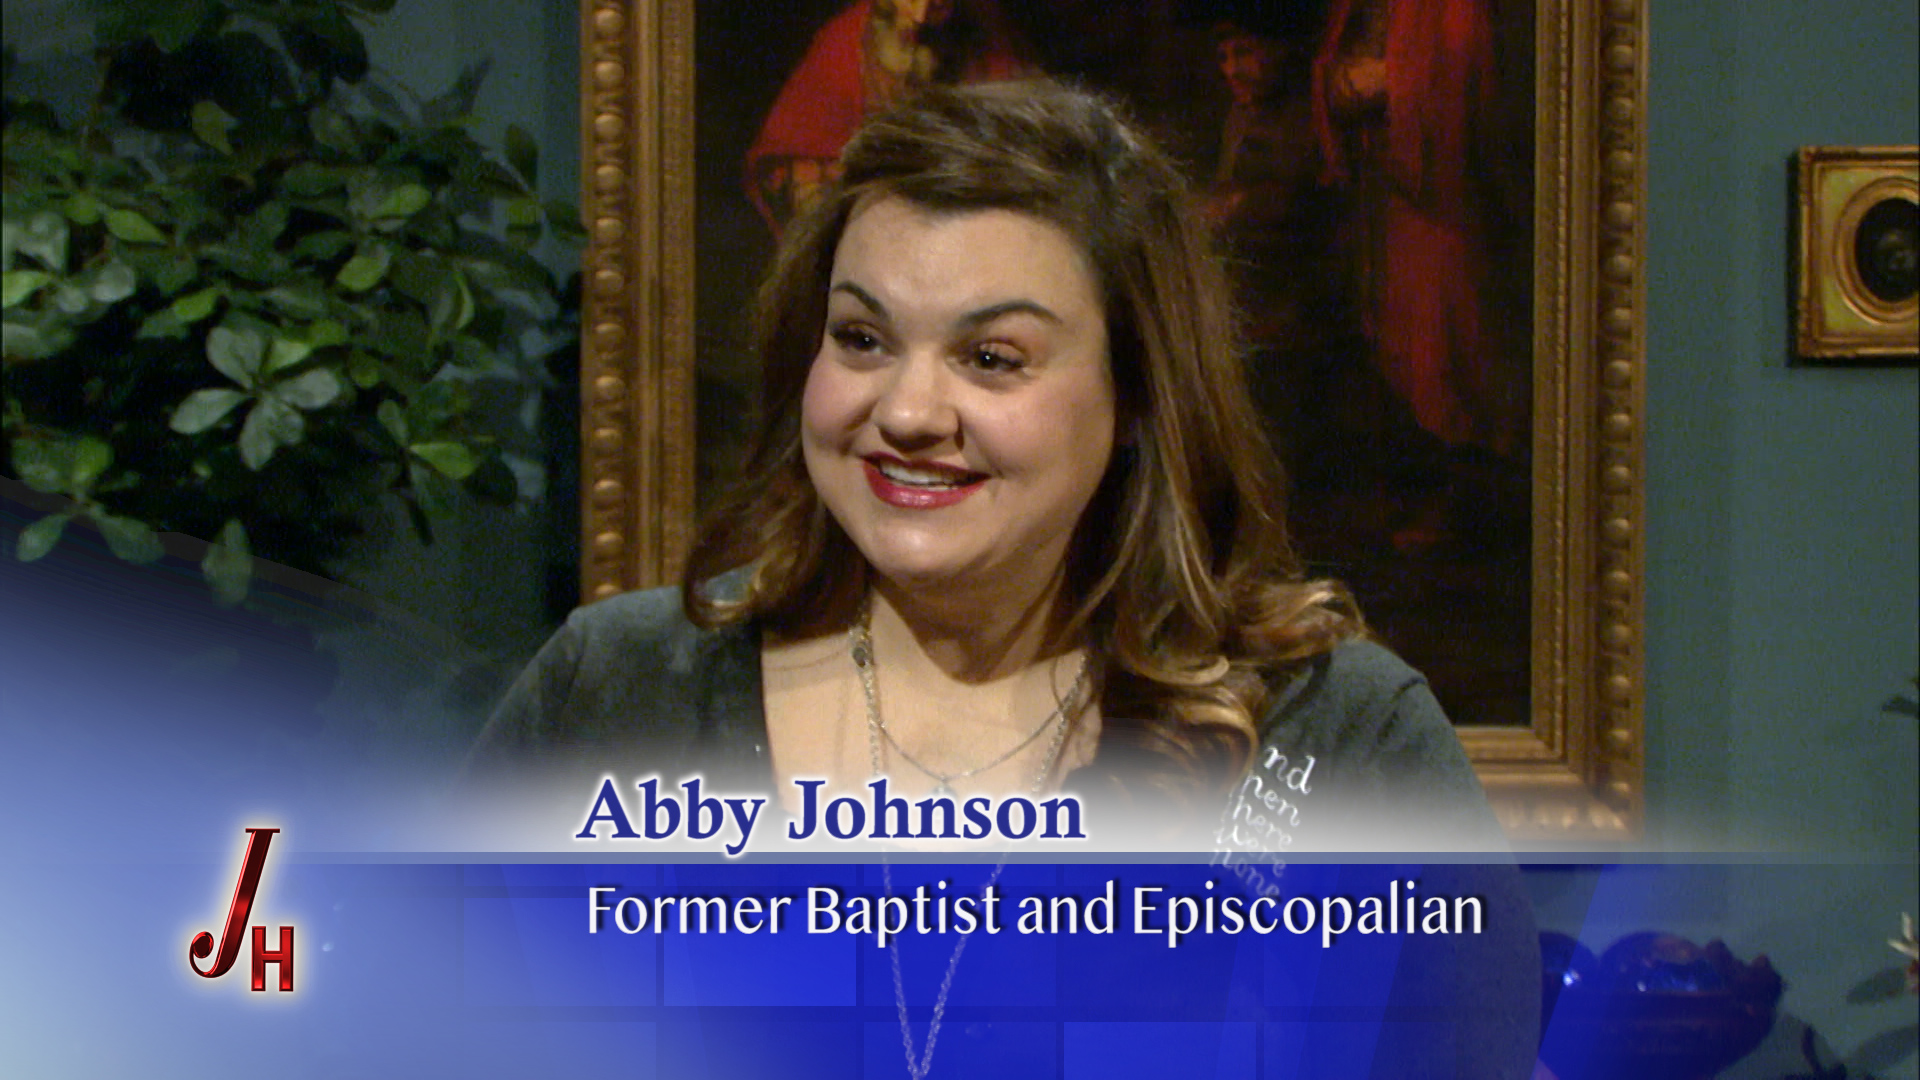 Abby Johnson Talk on December 13 Has Sold Out - The Basilica of Saint Mary